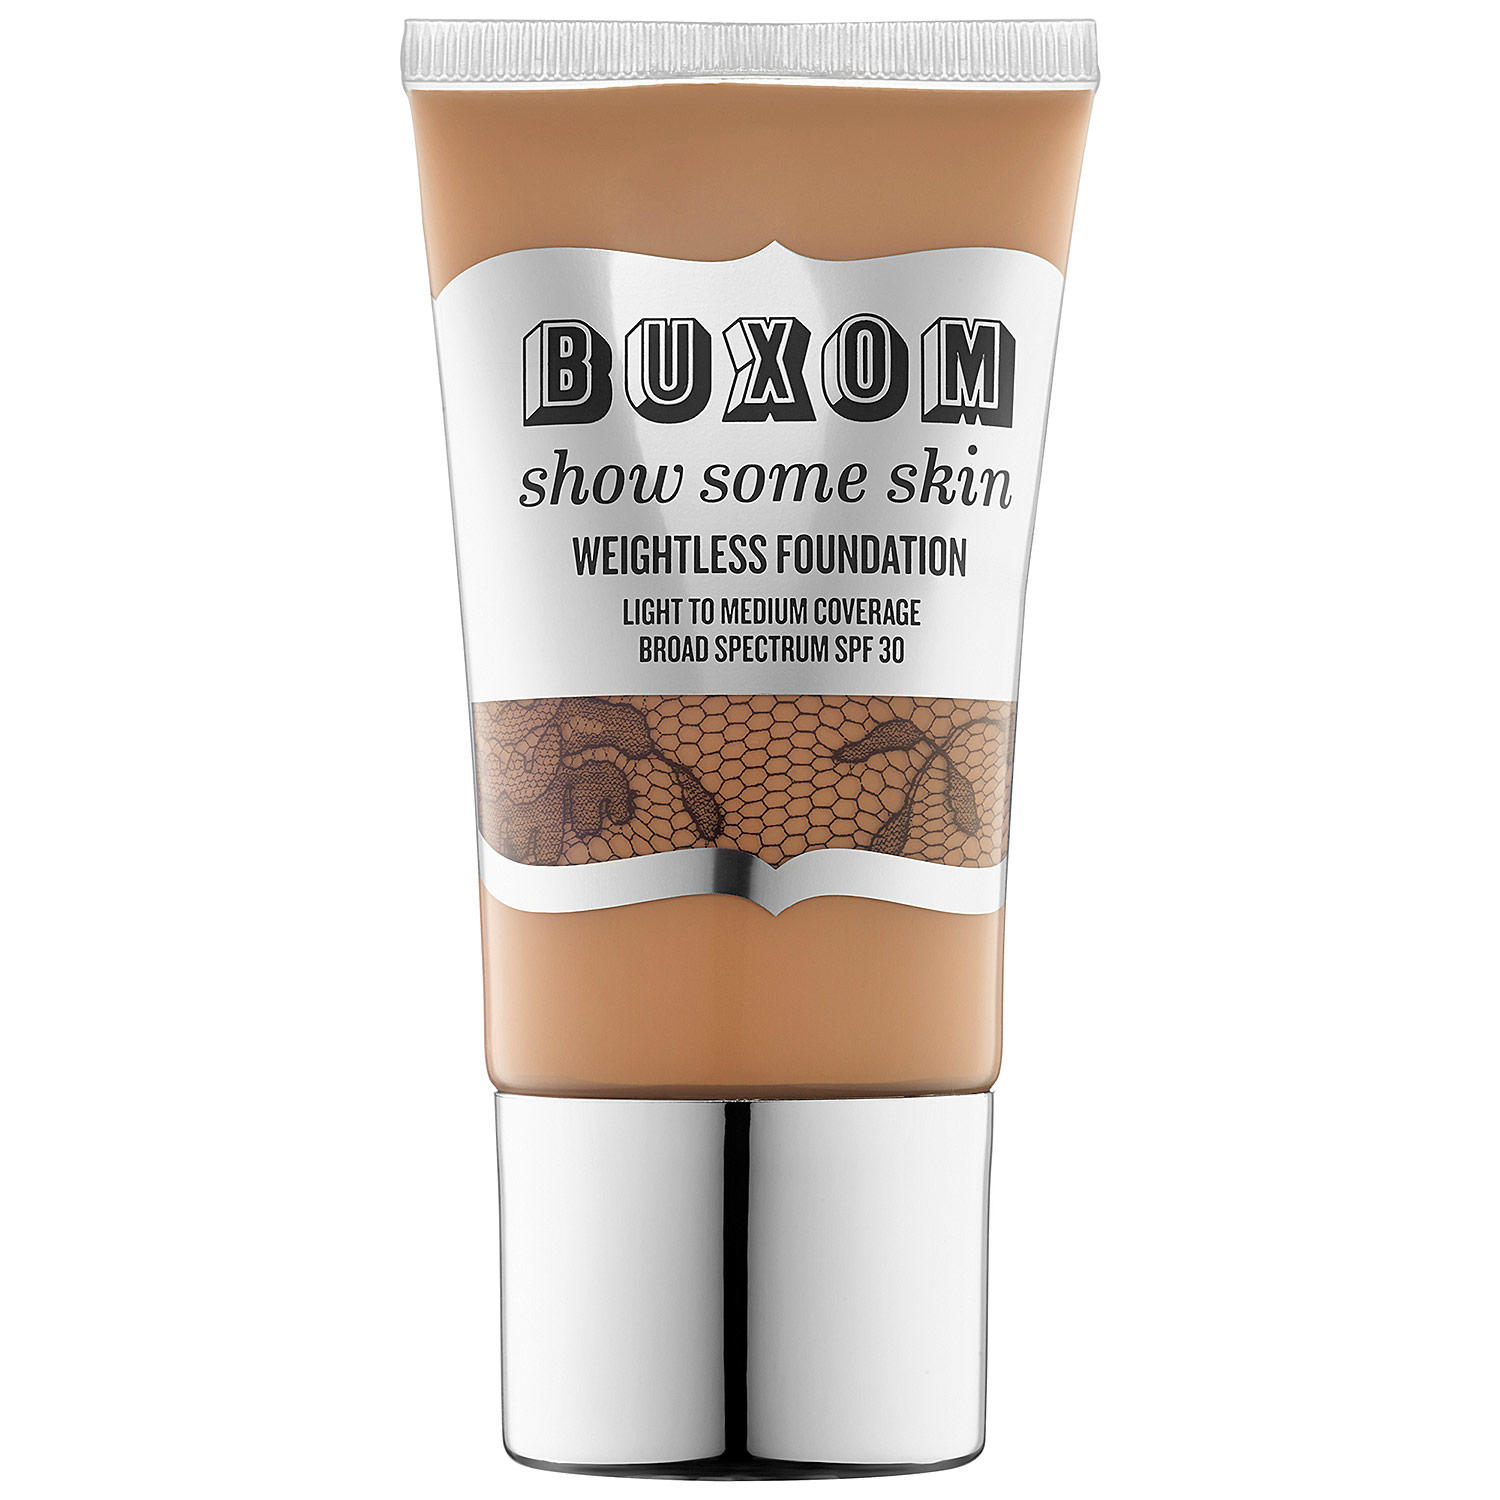 Buxom Show Some Skin Weightless Foundation SPF30 Tan-Talize Me